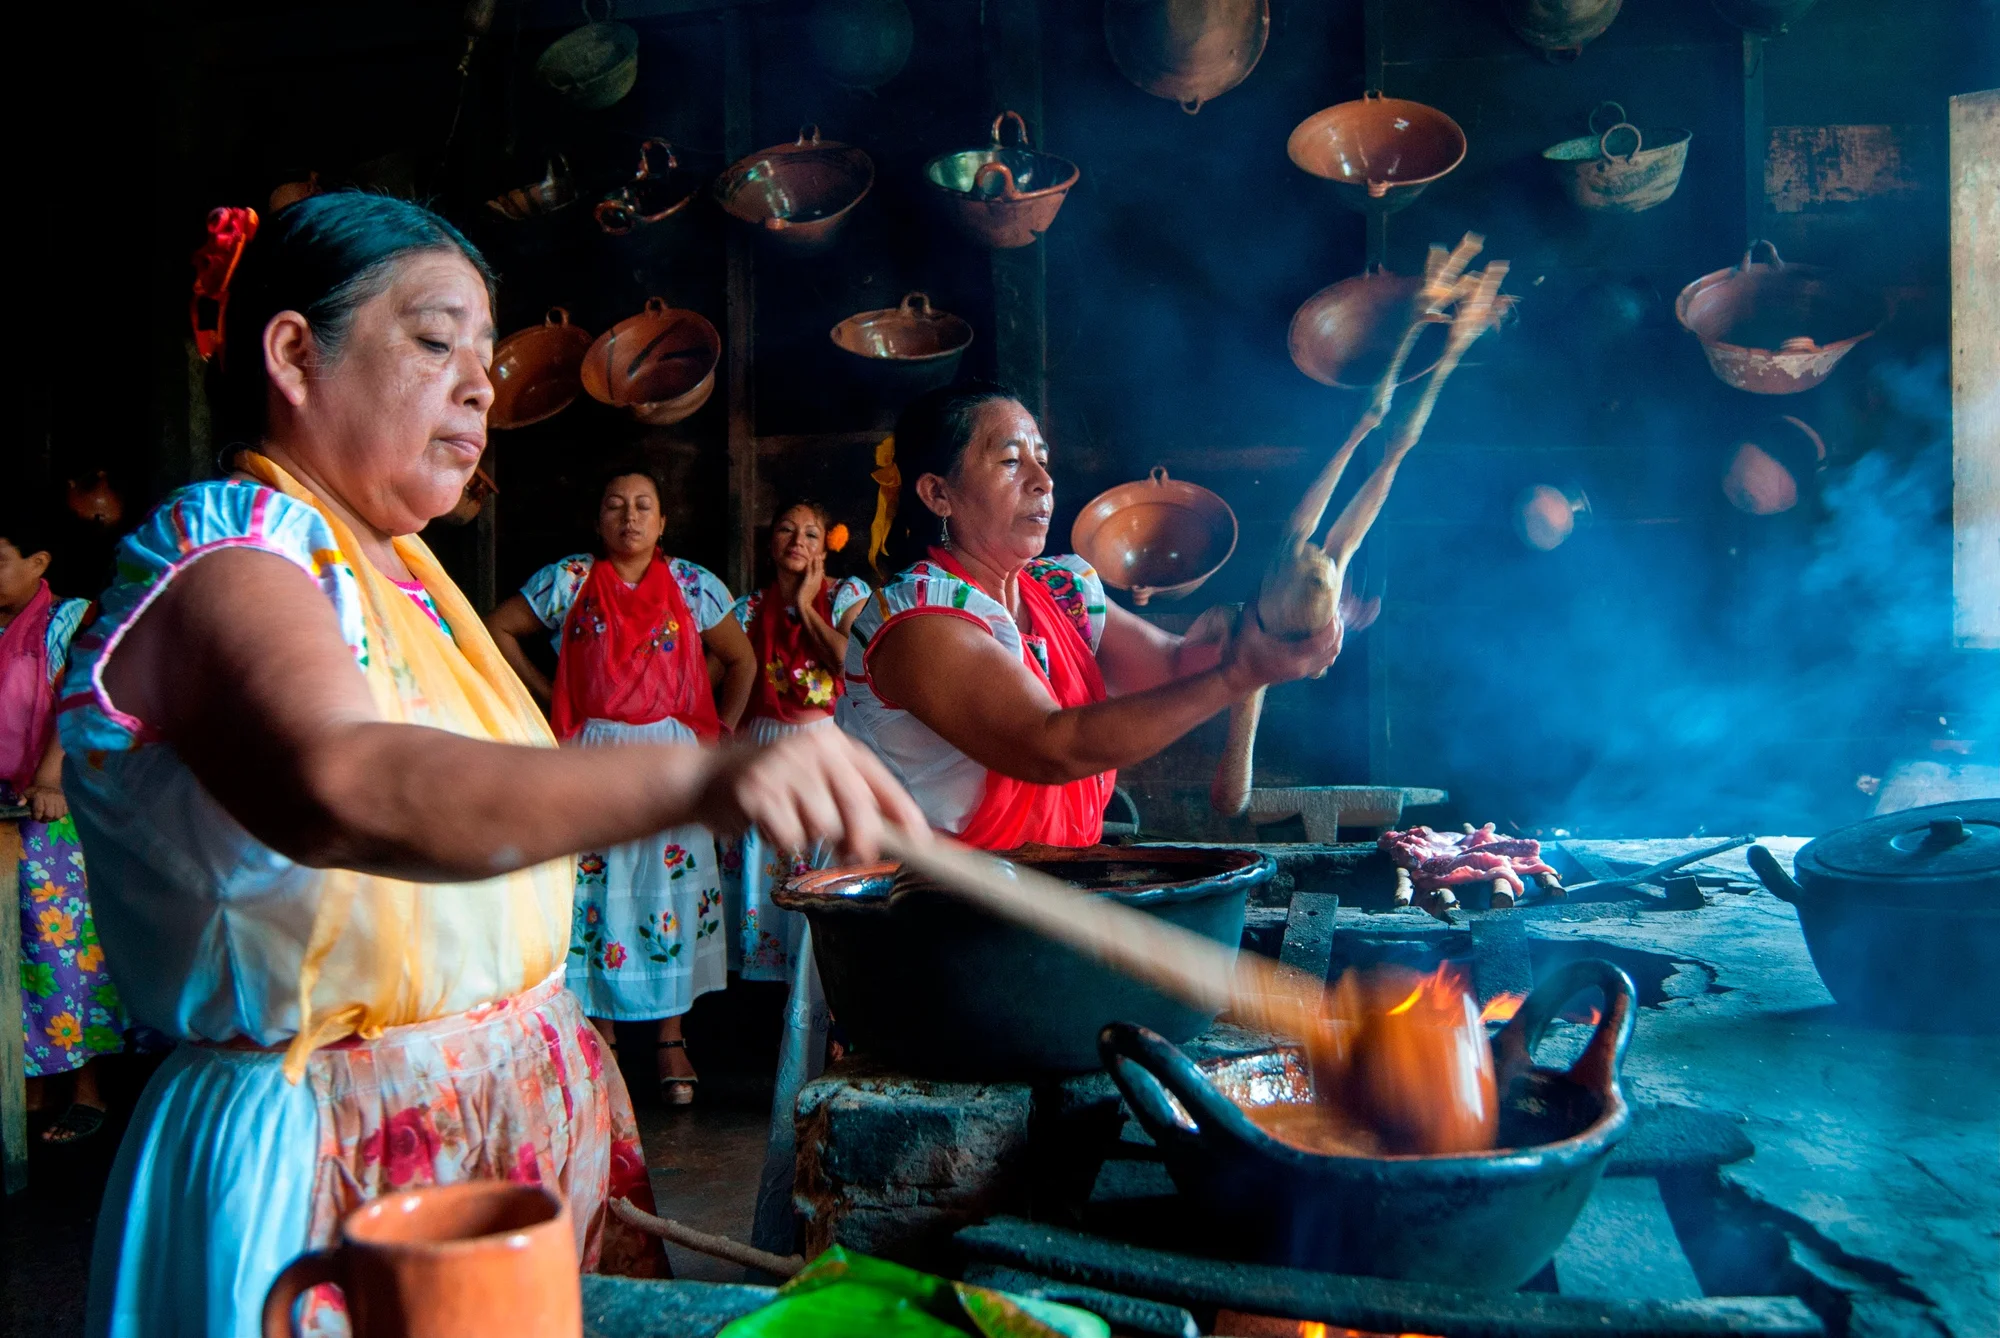 Two women cook together with three women observing behind them. The woman in the foreground uses a ladle to stir soup. The other woman is preparing meat above a grill. Pottery is hanging from the wall behind them.